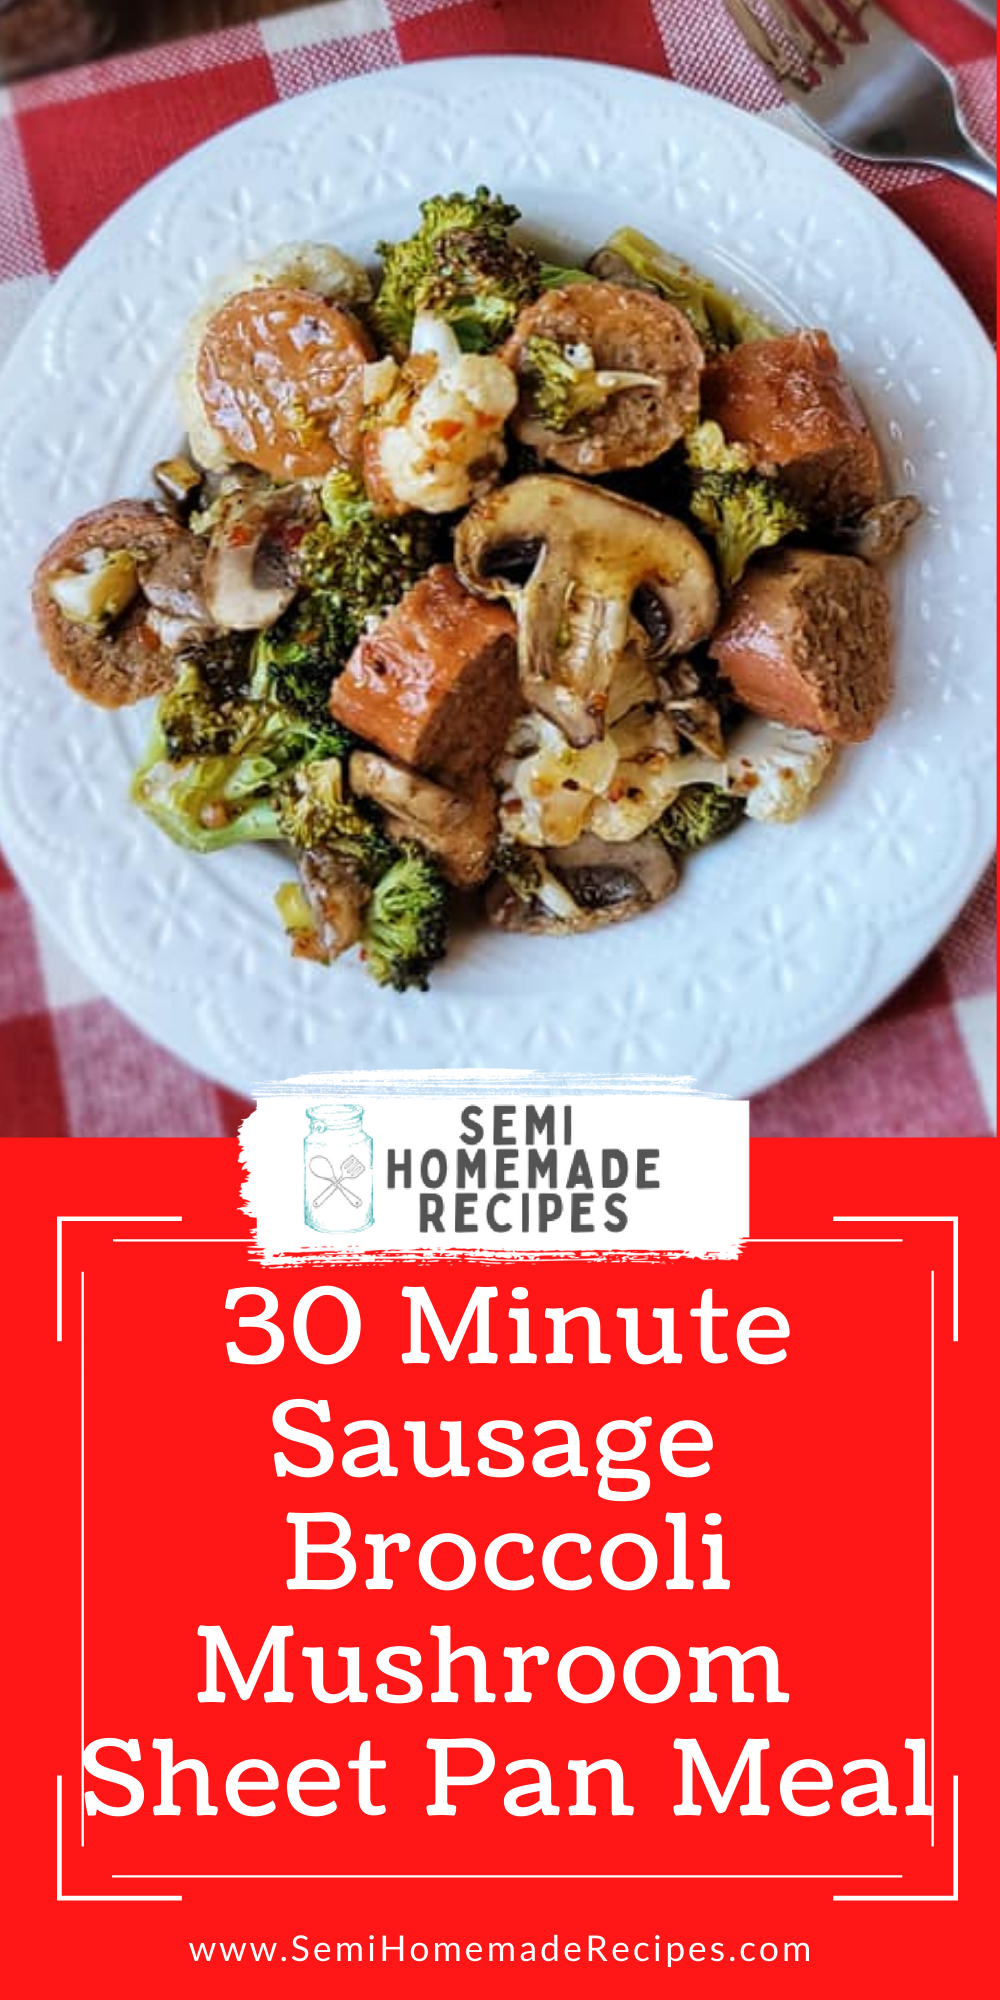 30 Minute Sausage Broccoli Mushroom Sheet Pan Meal - Sausage, Broccoli Florets, cauliflower, mushrooms and a great easy dinner recipe that is cooked on one sheet pan for less clean up!